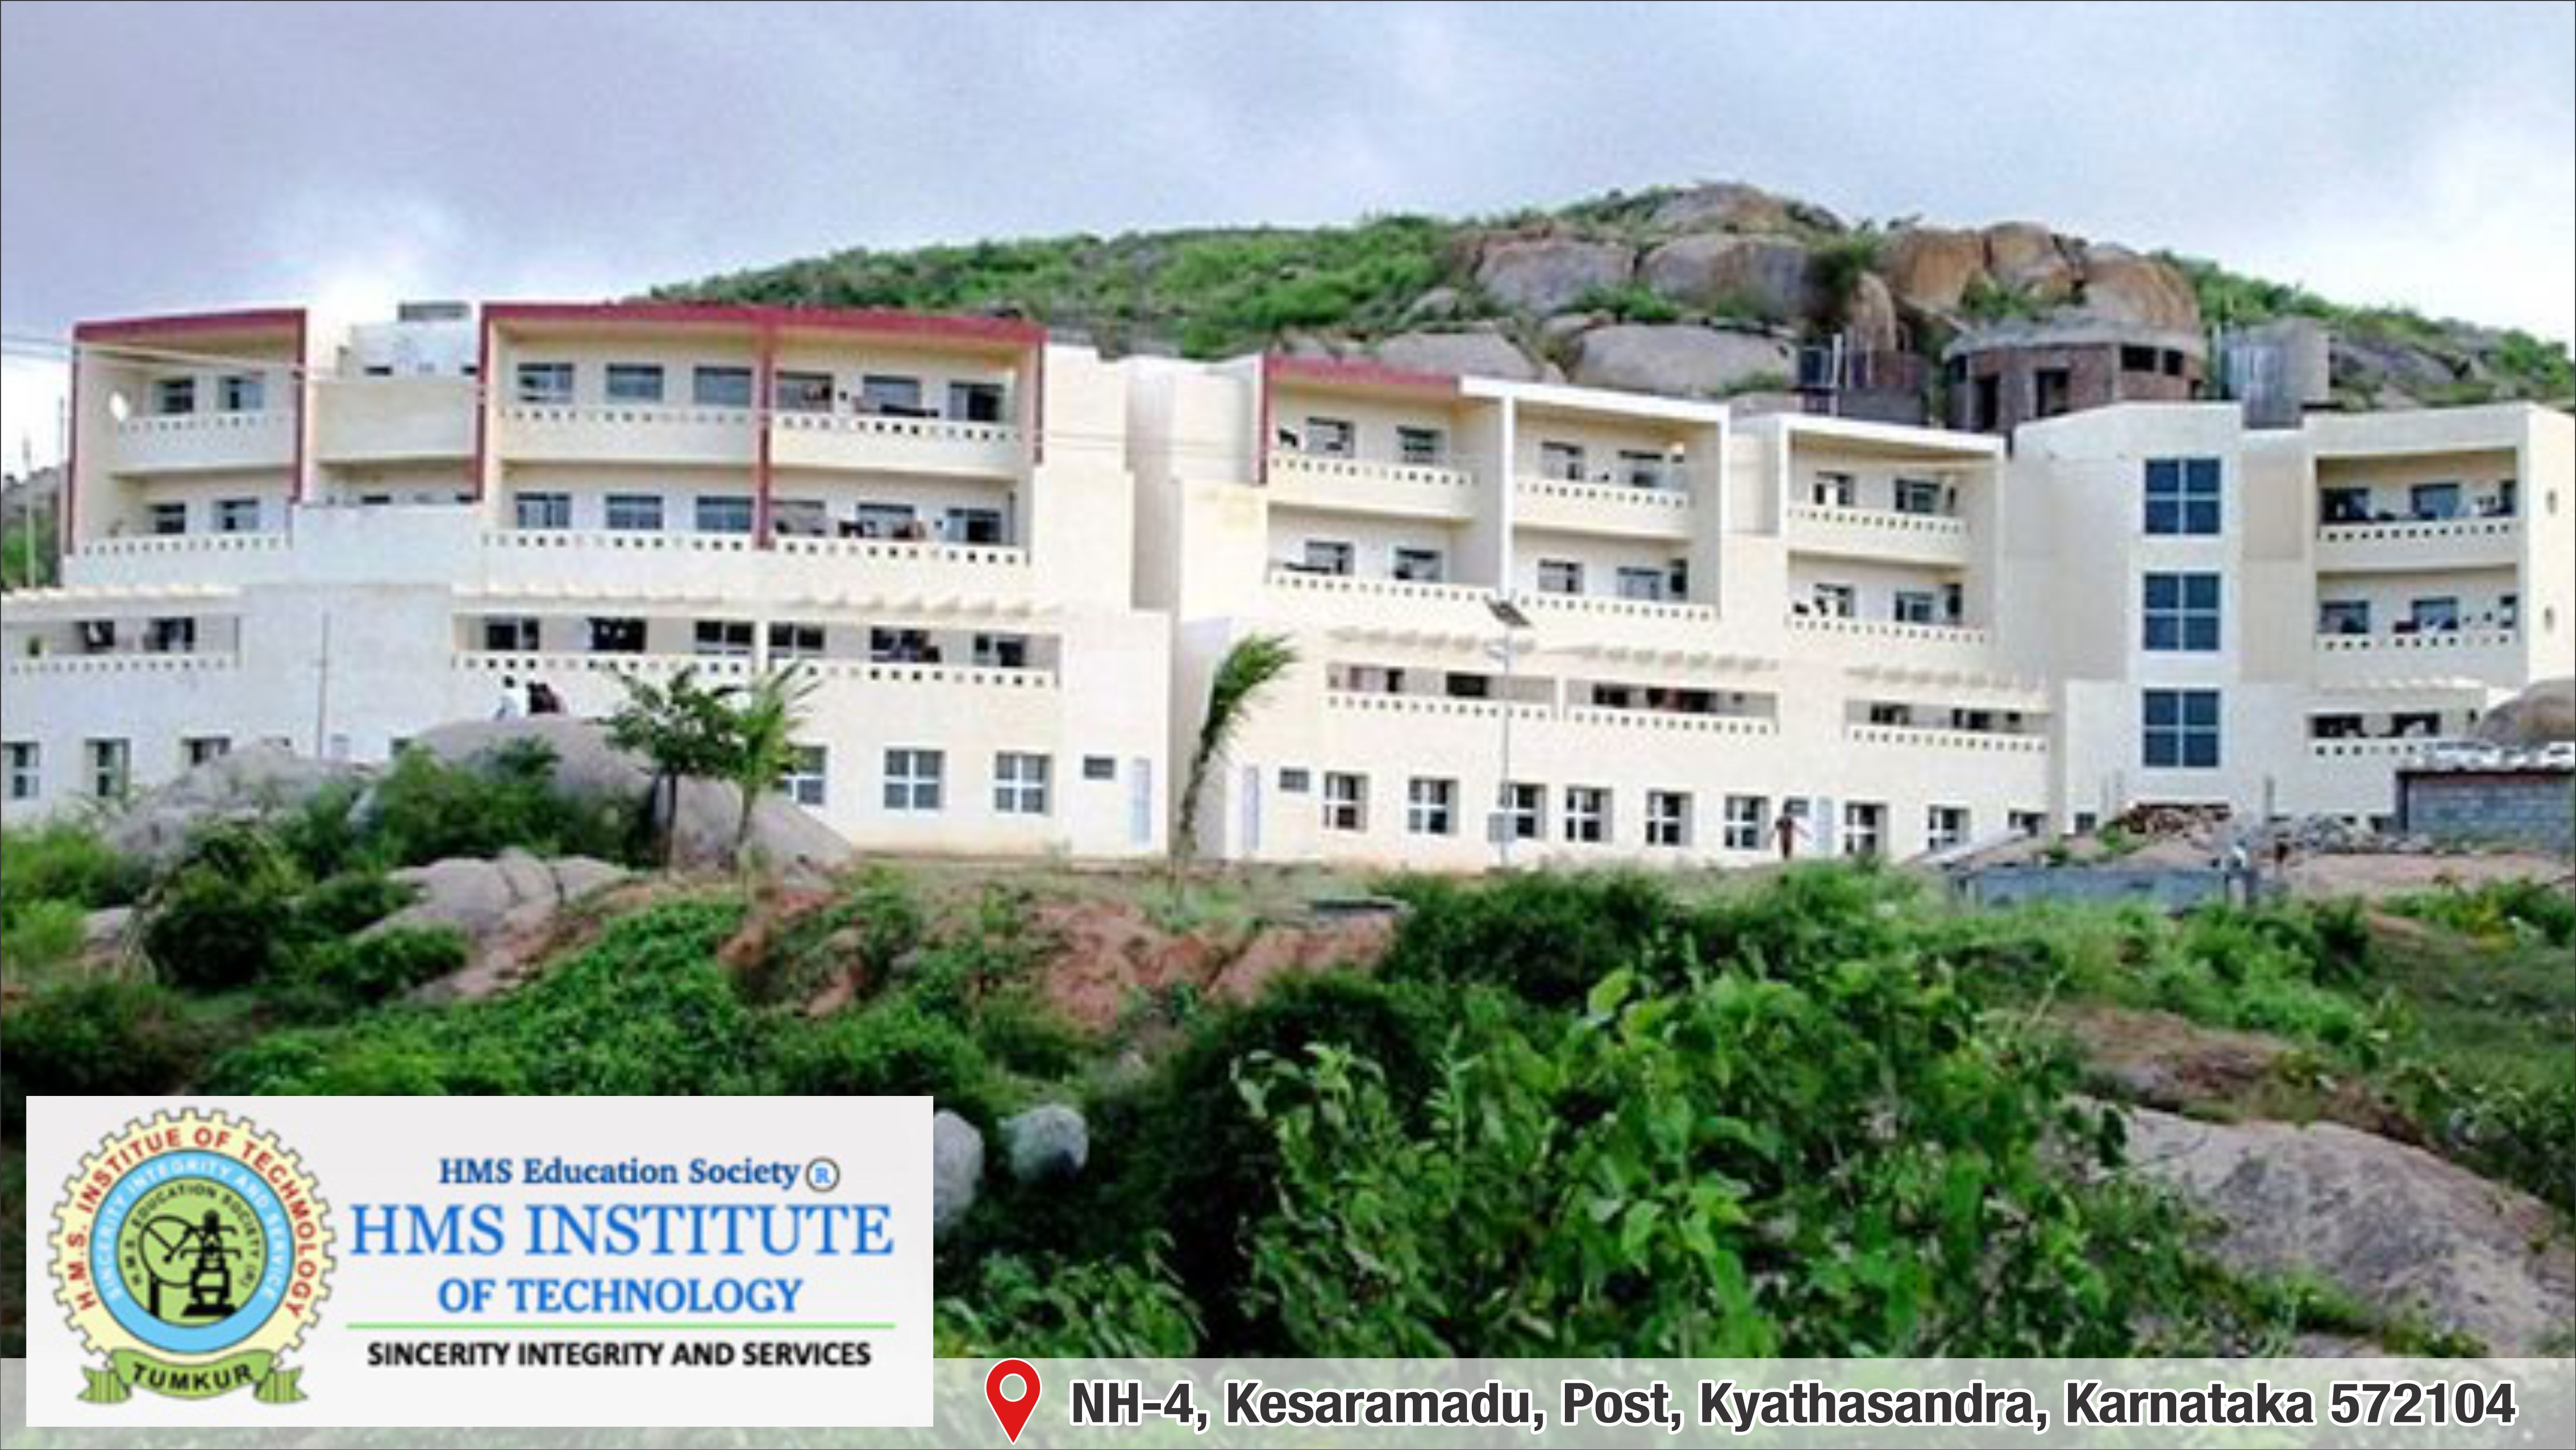 out side view of HMS INSTITUTE OF TECHNOLOGY (HMSIT)